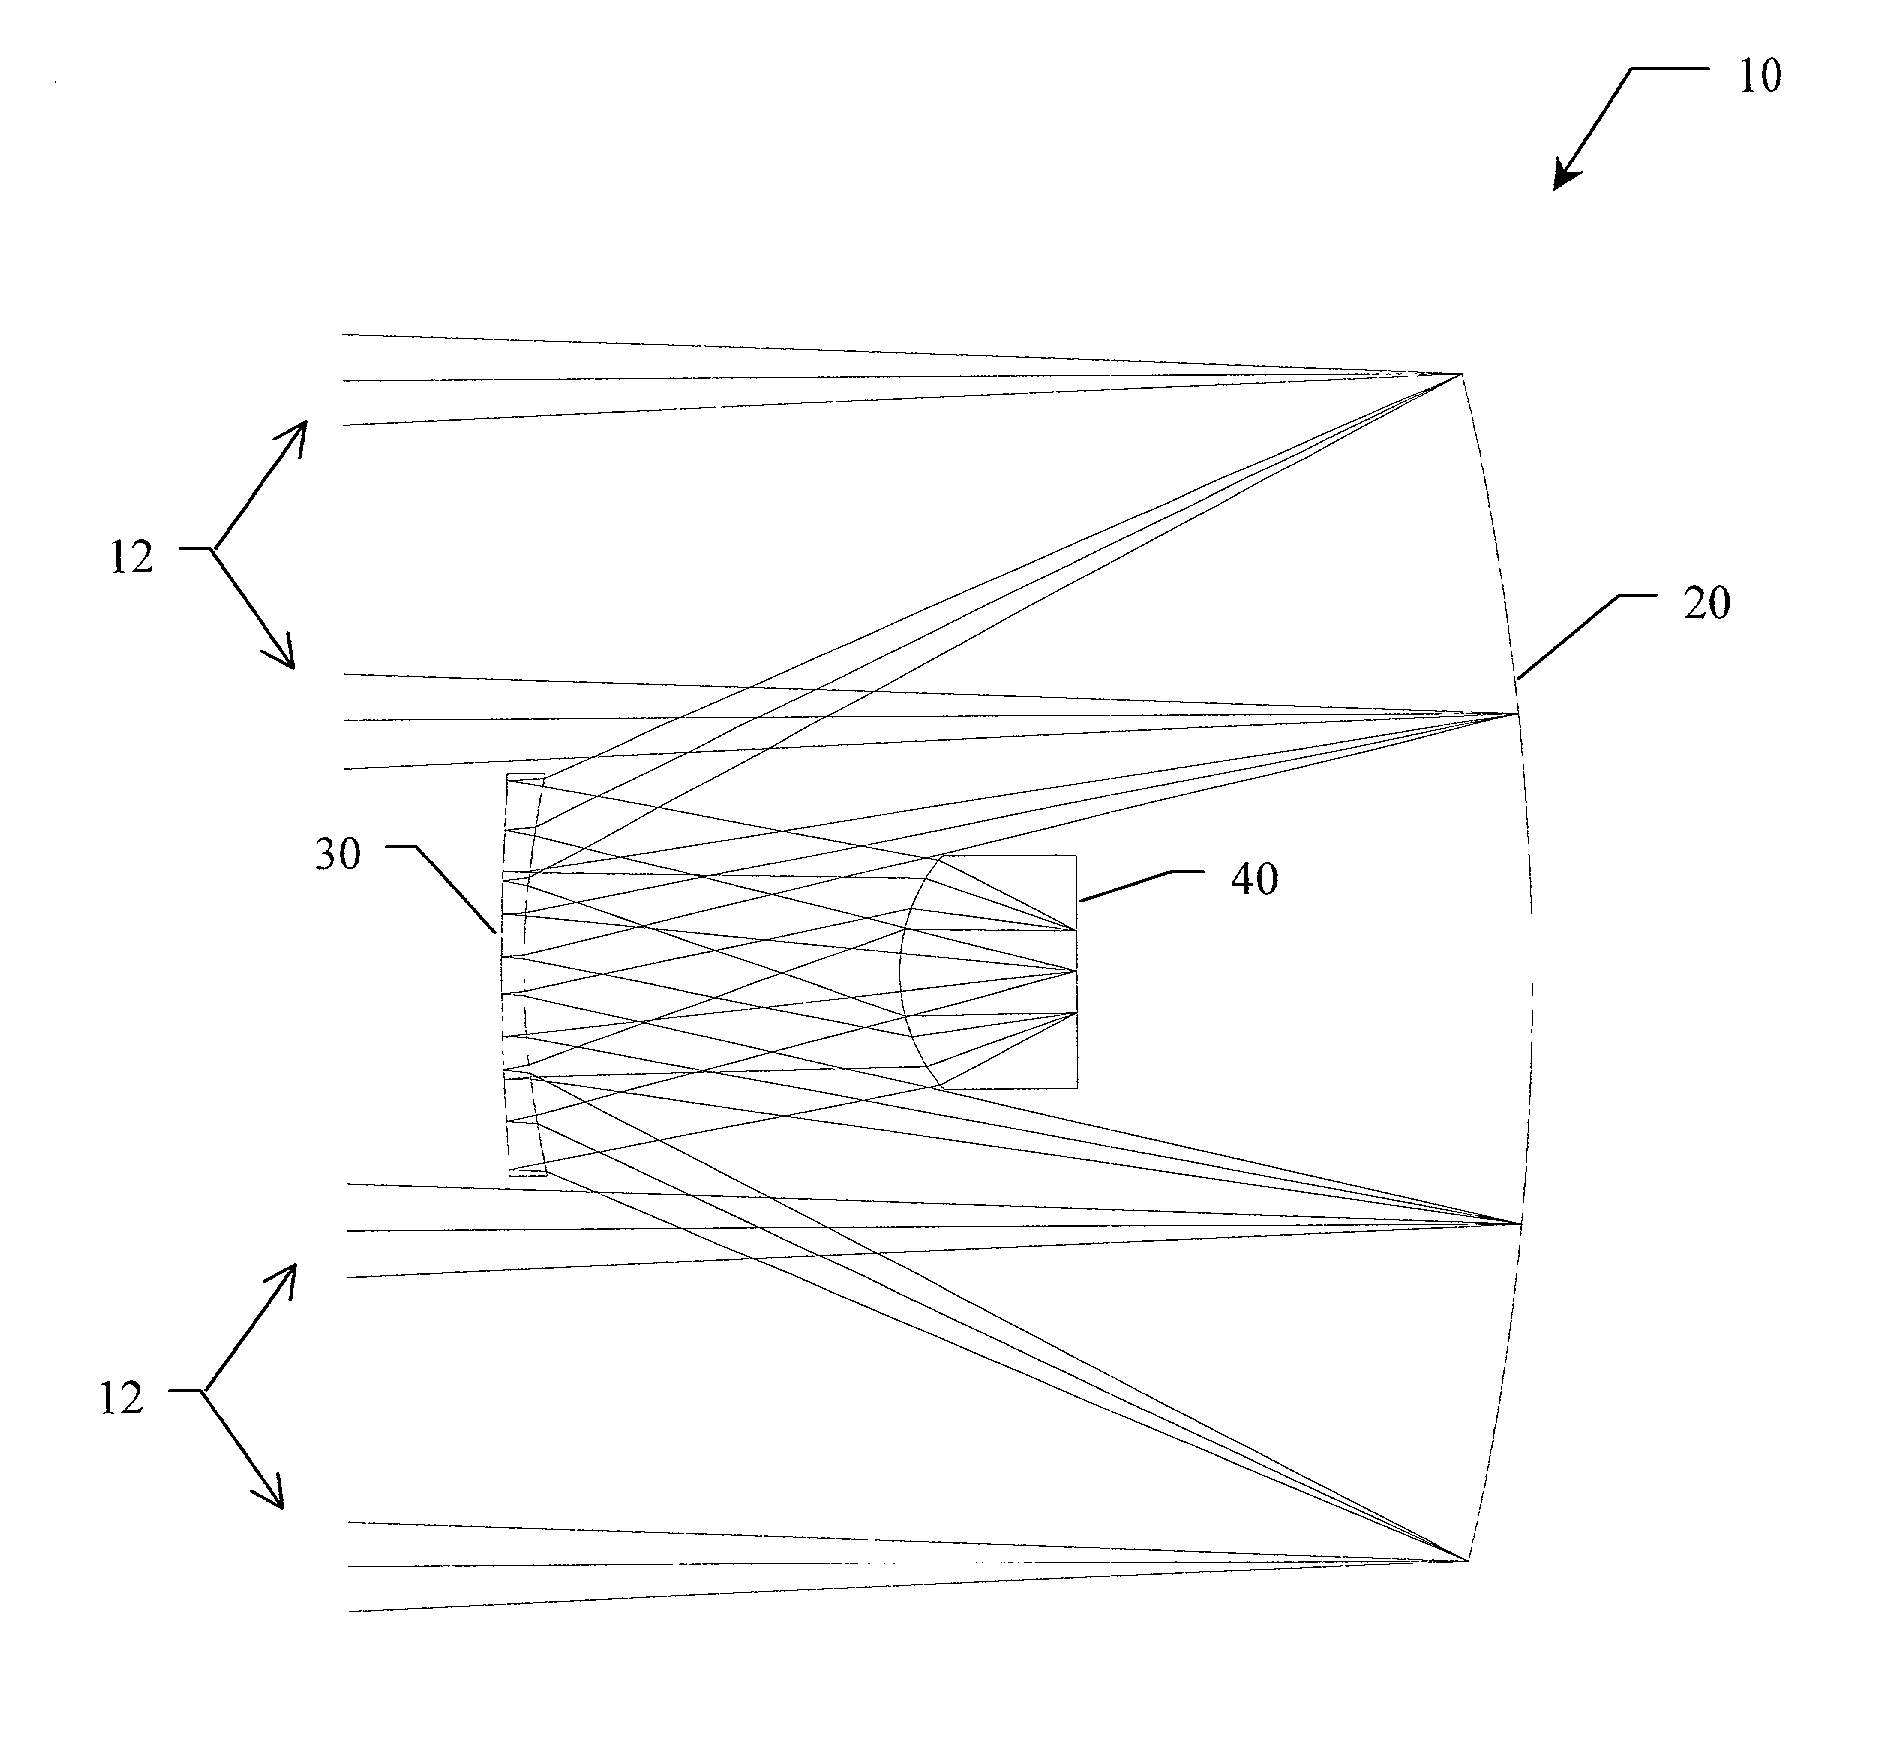 Optical system for simultaneous imaging of LWIR and millimeter wave radiation